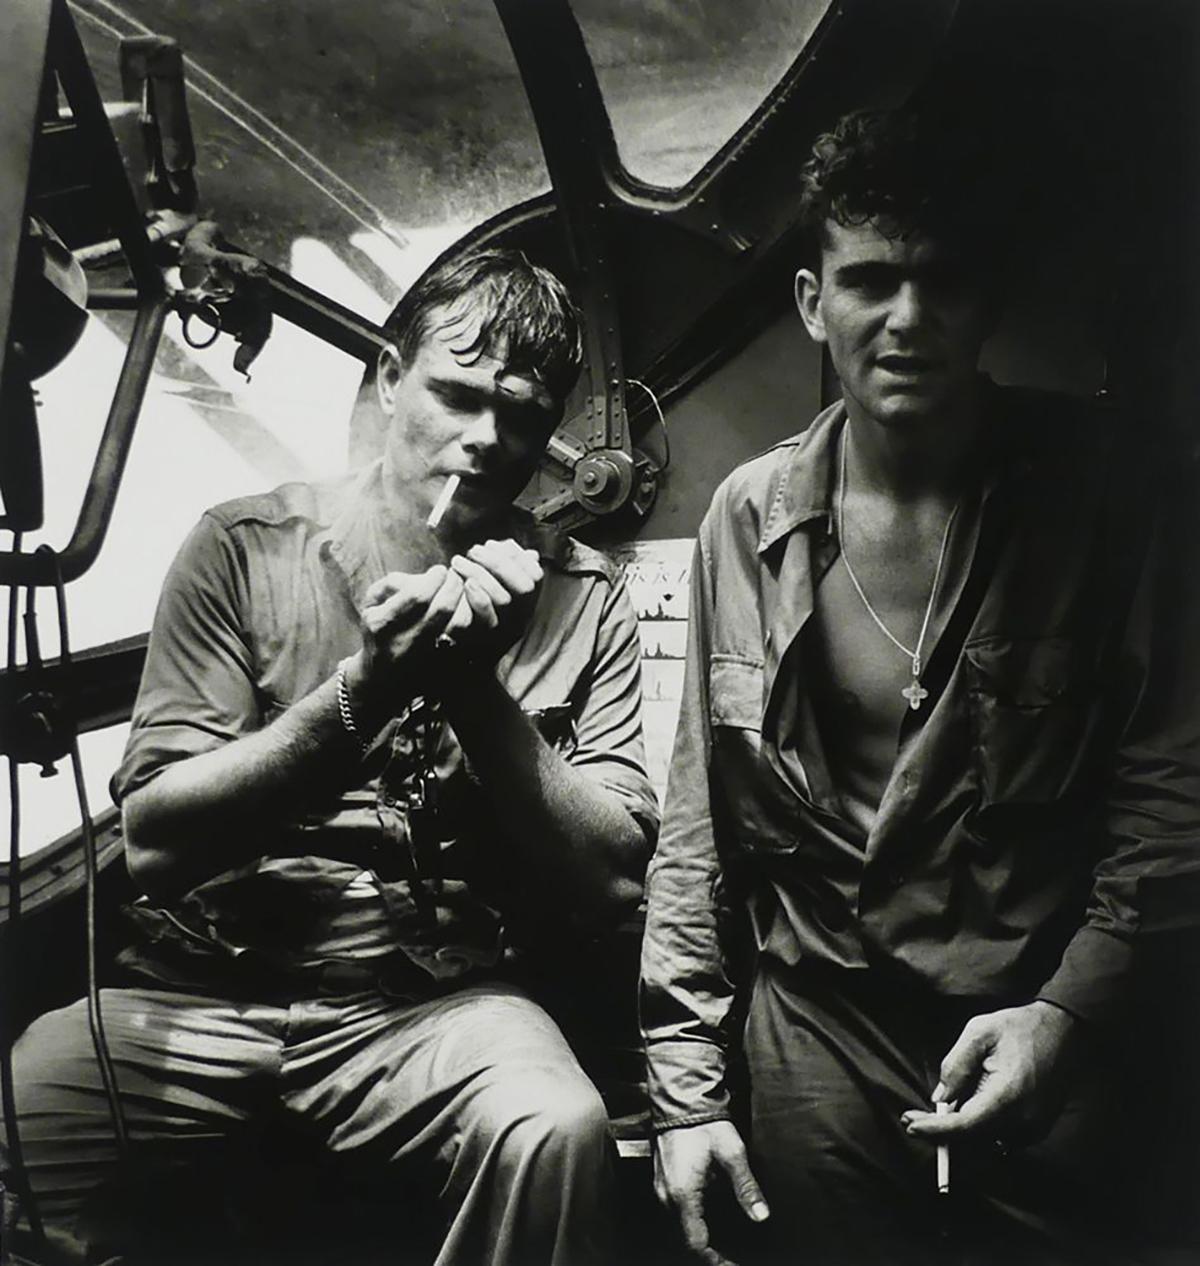 Horace Bristol Black and White Photograph - Rescued Airman (Smoking Aboard 'PBY Blister Gunner'), Rabaul